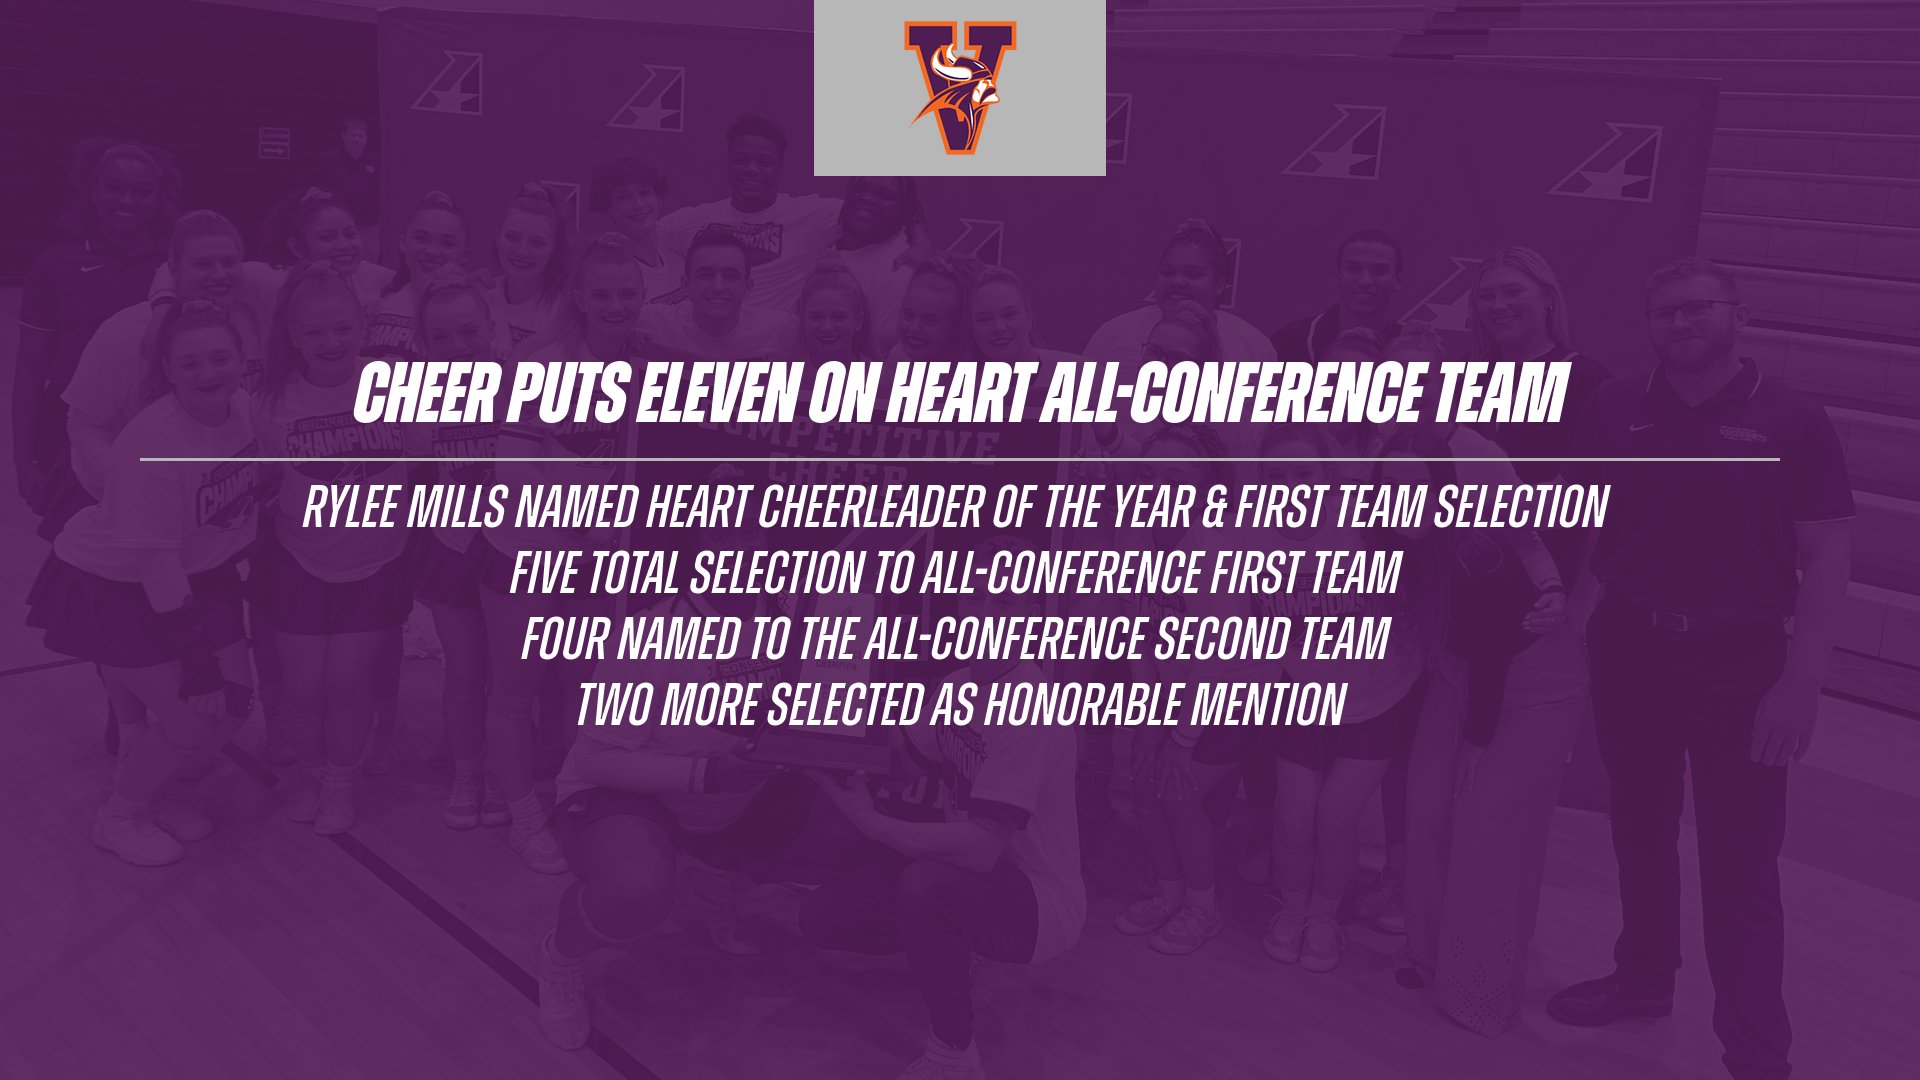 Cheer Puts Ten on All-Conference Team & Cheerleader of the Year